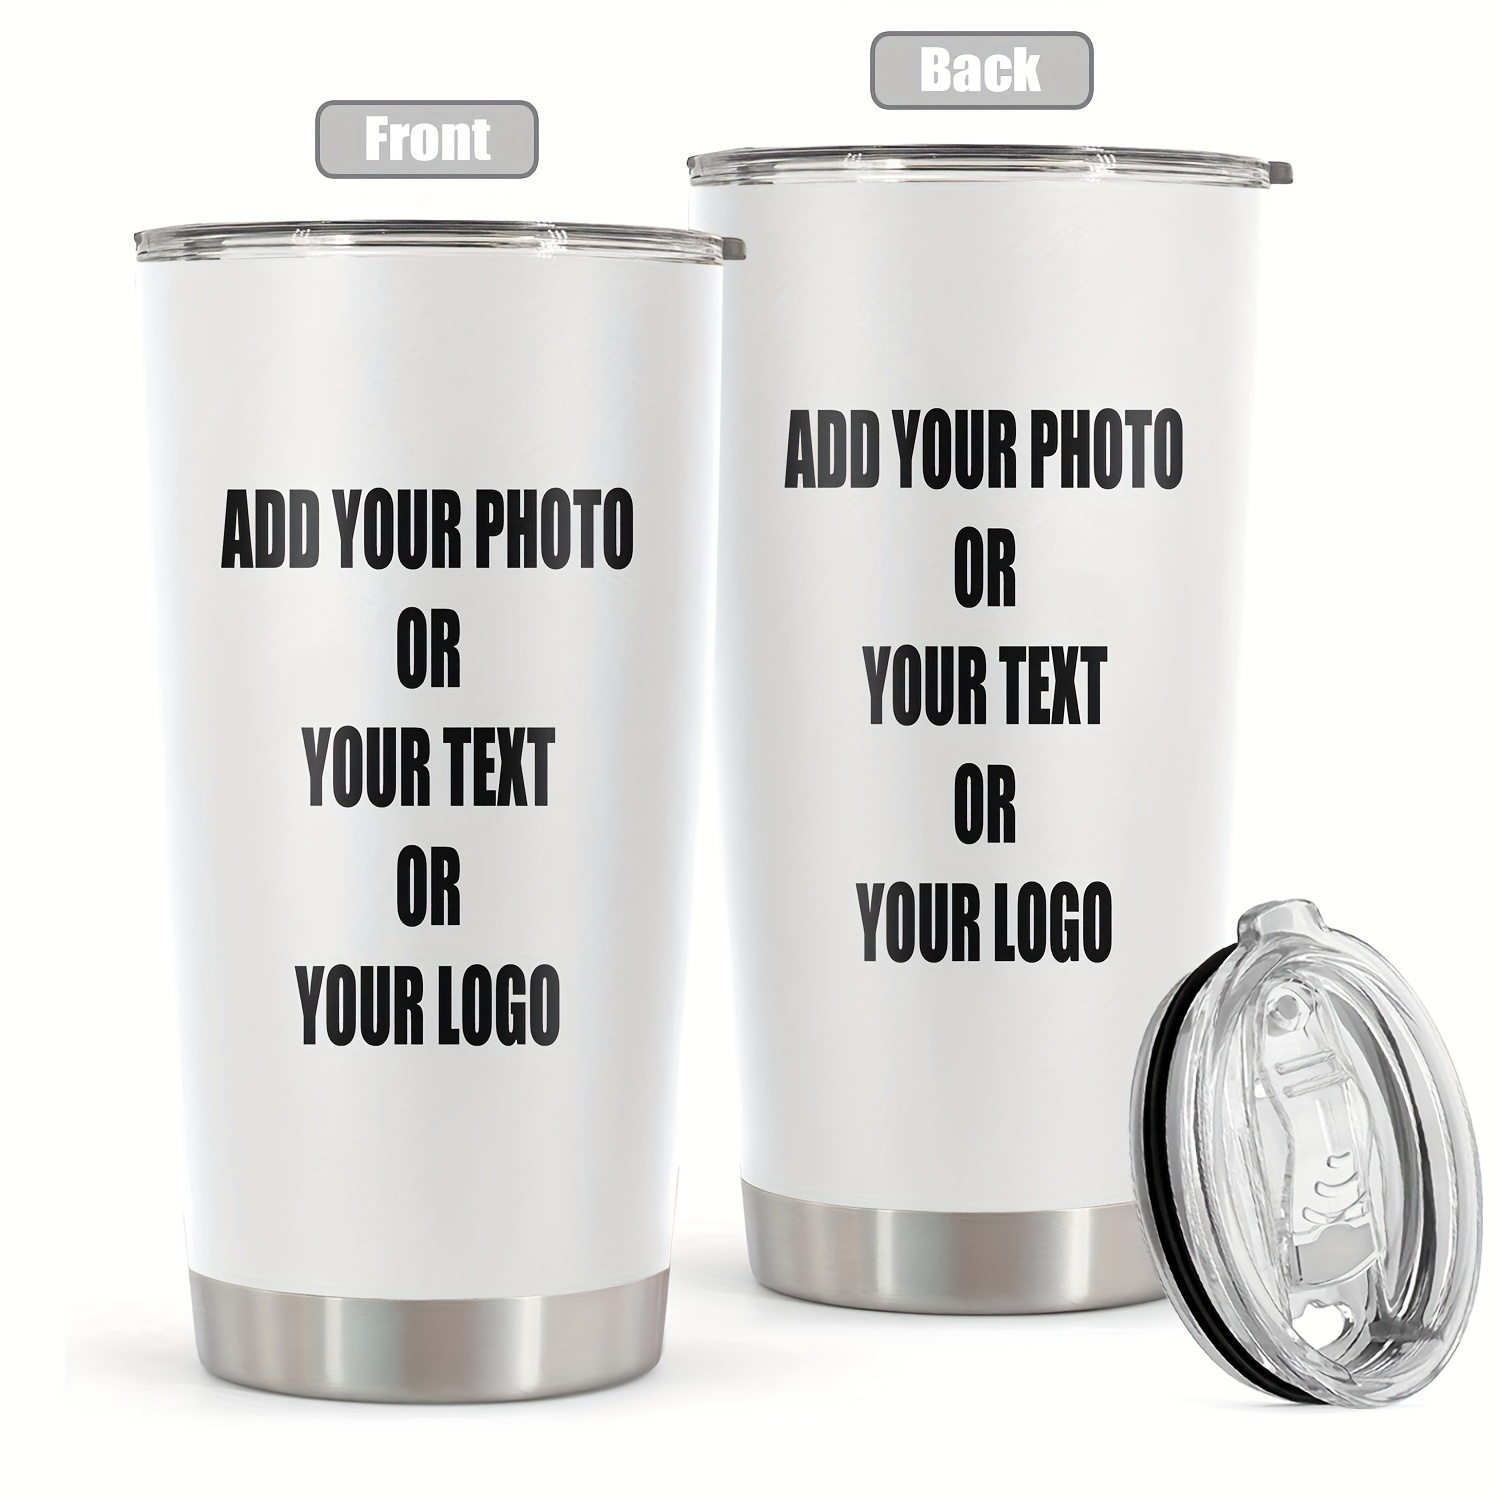 

Custom 20oz Stainless Steel Tumbler - Personalize With Your Photo, Text, Or Logo - Perfect Gift For Family & Friends On Birthdays, Christmas, And More